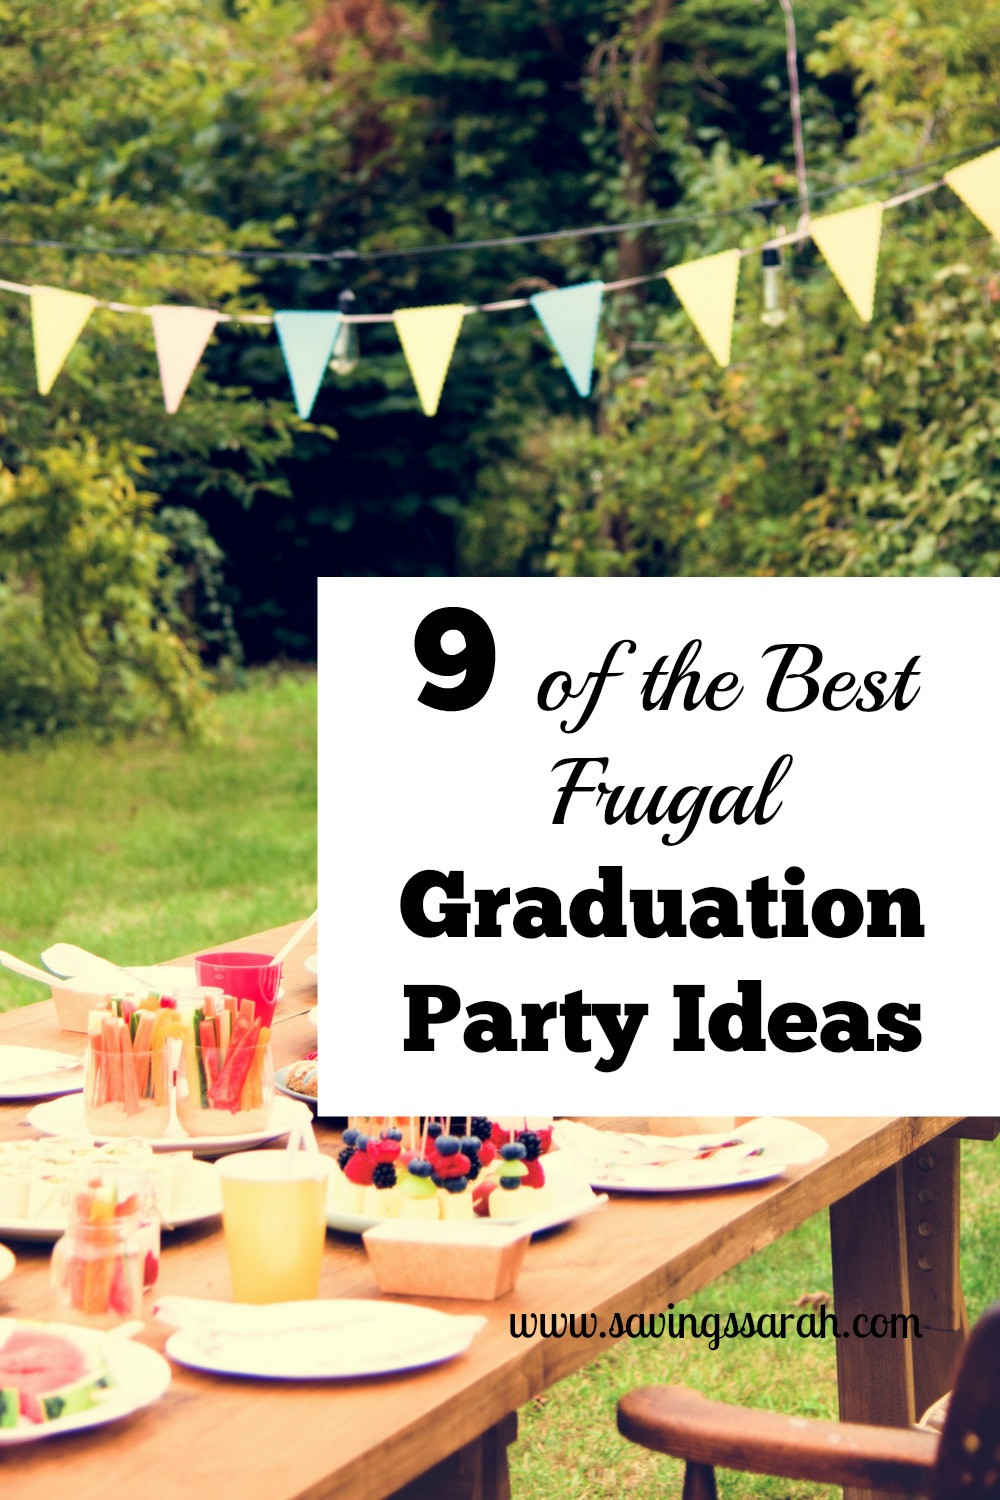 Graduation Party Program Ideas
 9 the Best Frugal Graduation Party Ideas Earning and